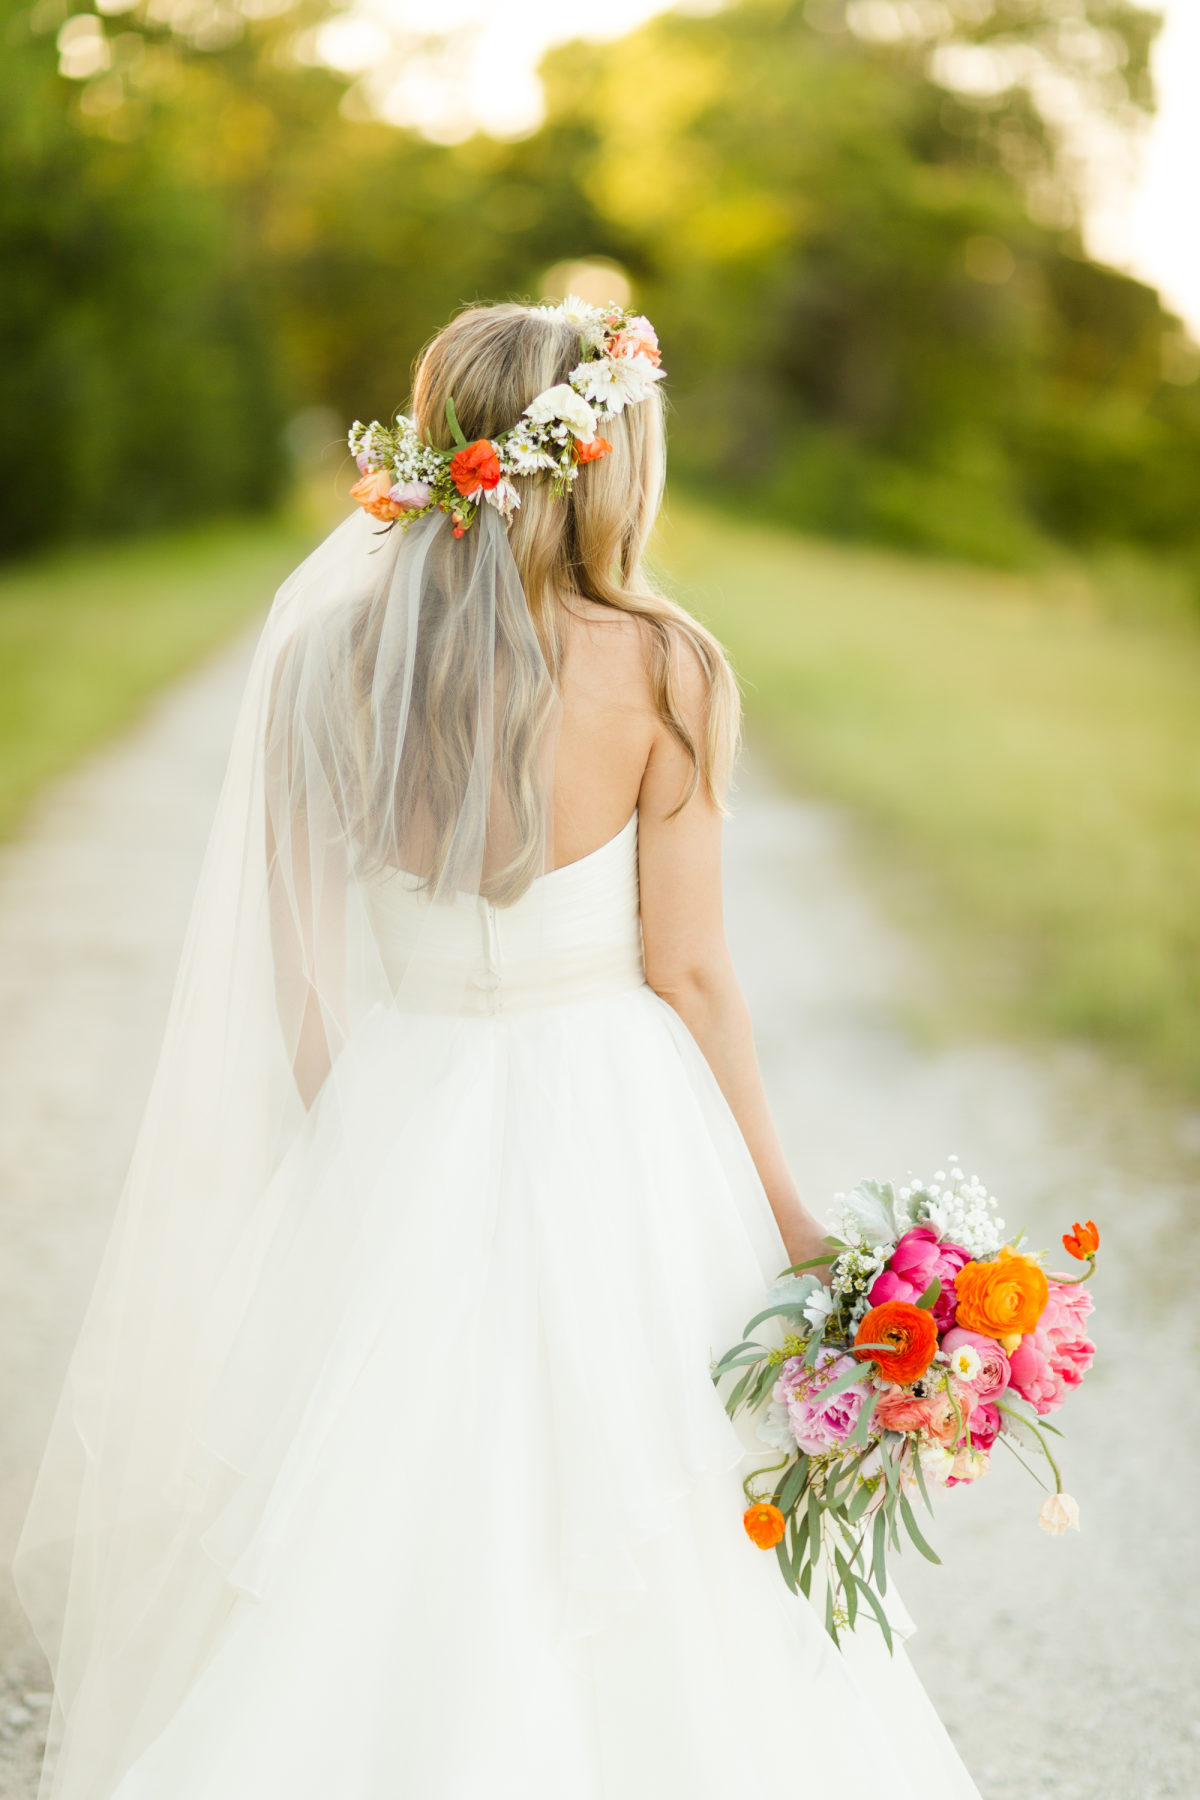 bride wearing strapless wedding dress, holding bridal pink and orange colored floral bouquet, wearing her blonde hair down, adorned with a floral crown and a long veil